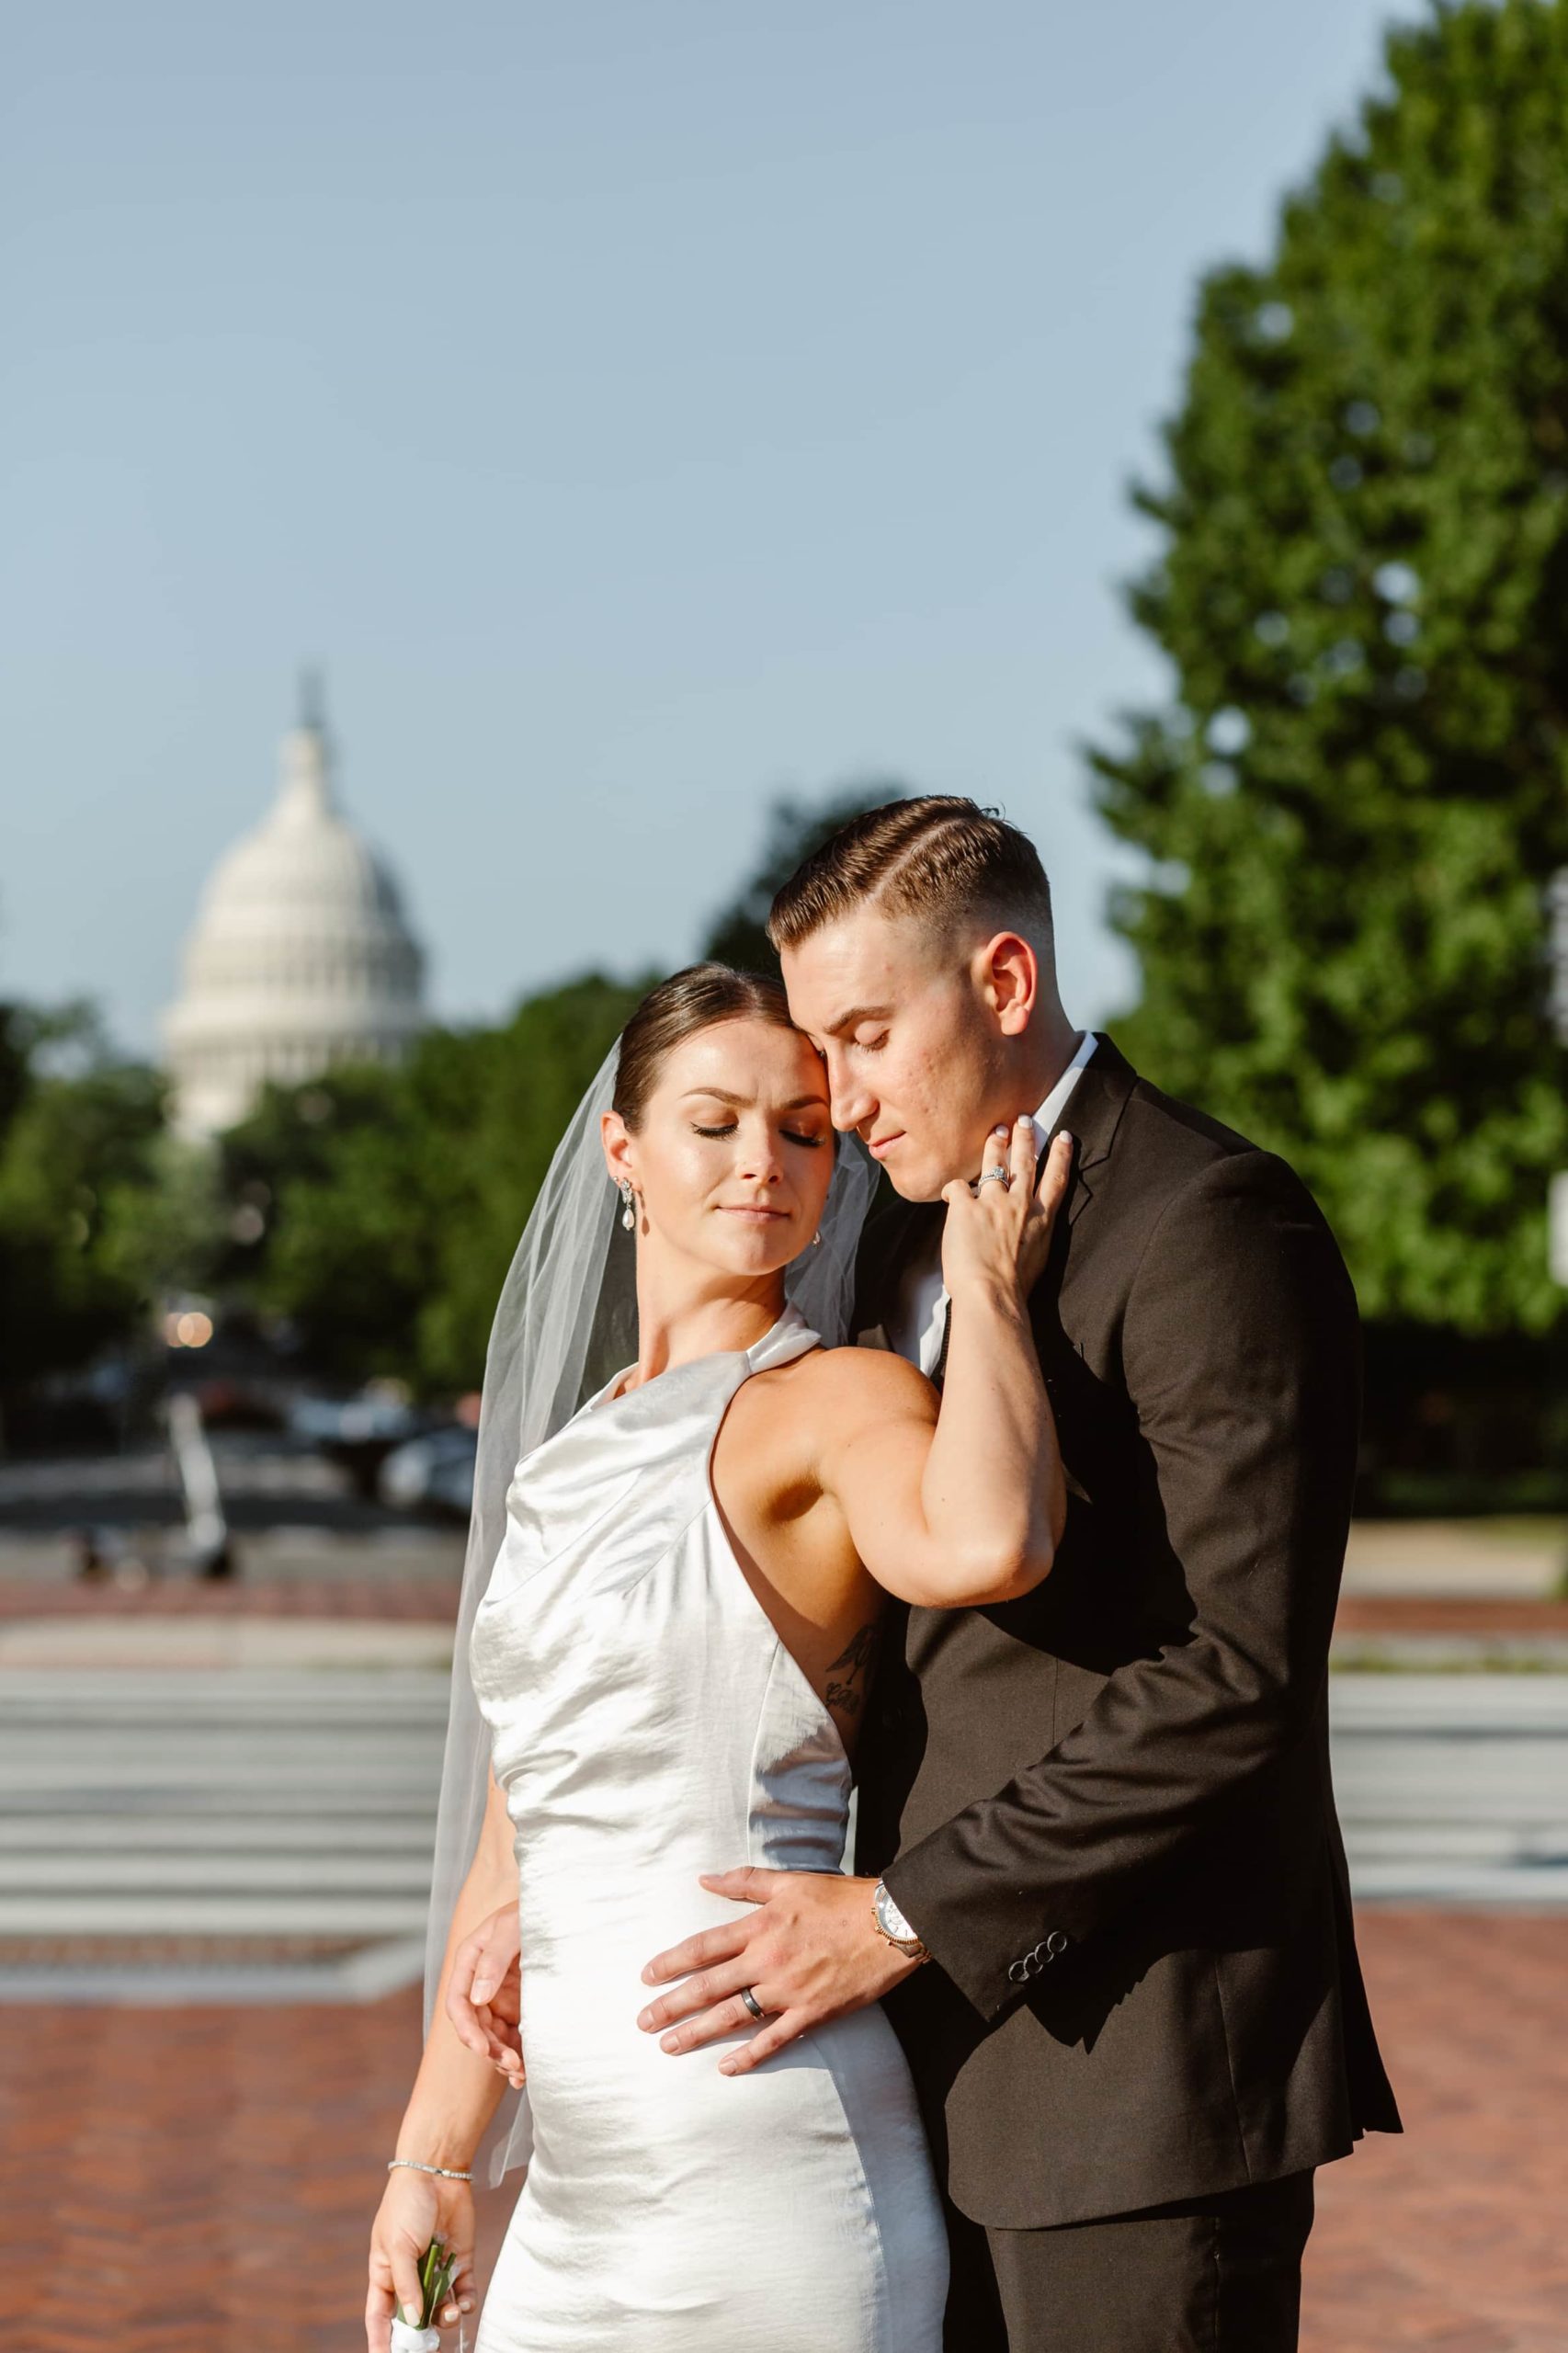 Groom stands behind bride in the sun after their wedding at Union Station with the U.S. Capitol building behind them. 